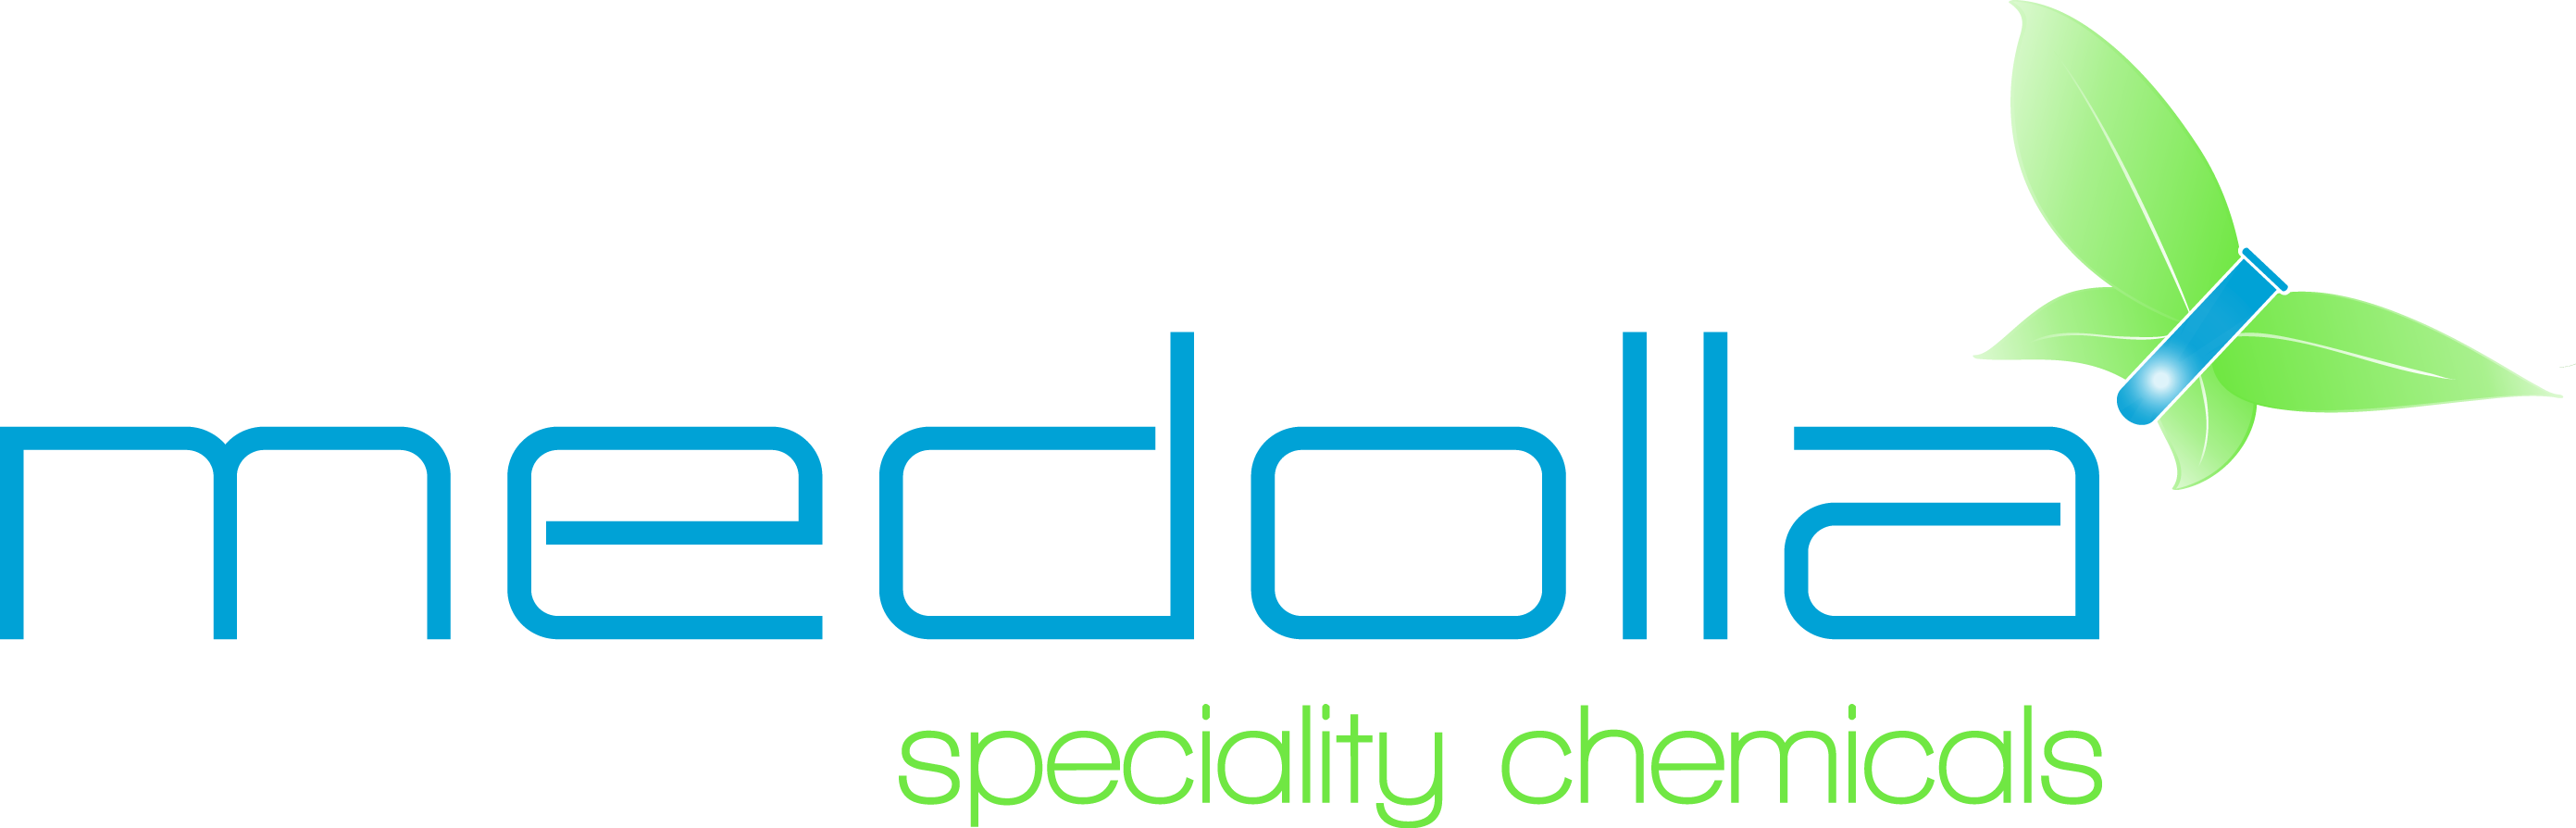 Medolla Speciality Chemicals